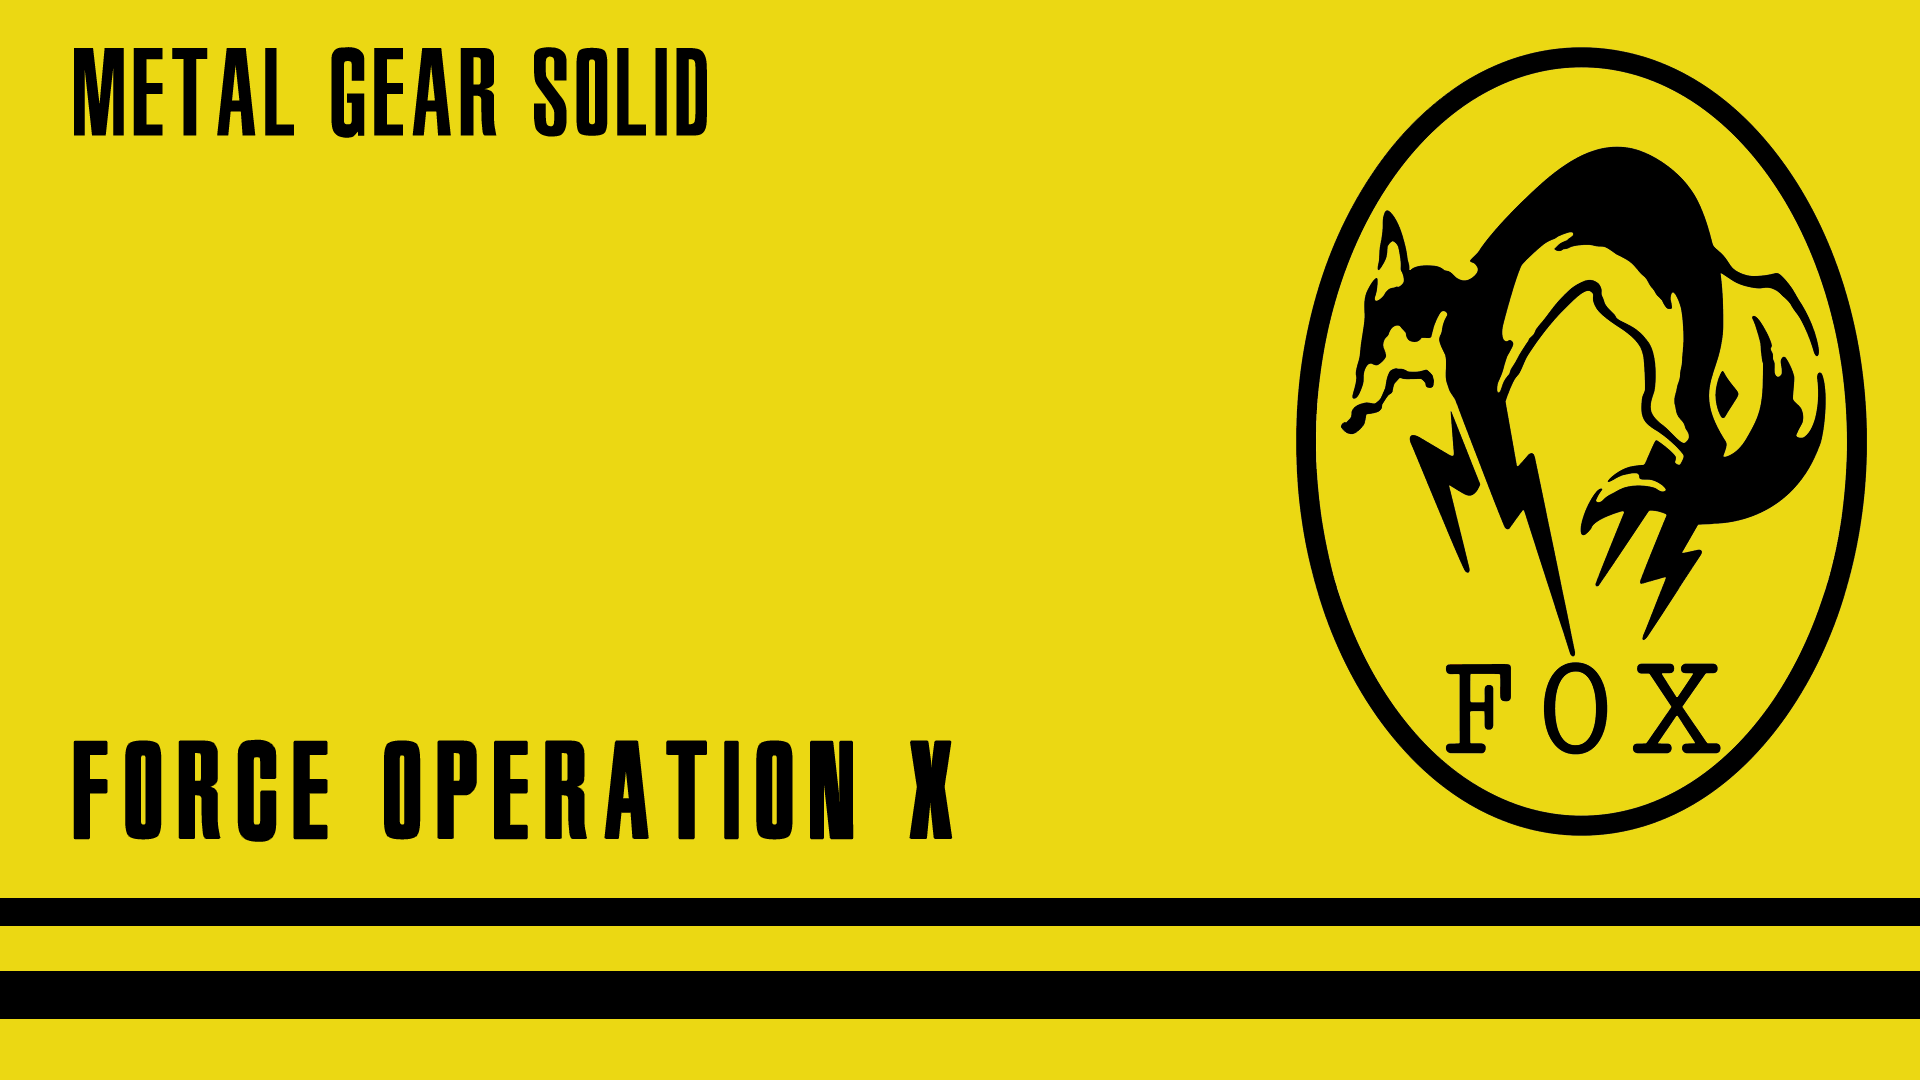 General 1920x1080 Metal Gear Solid simple background video game art typography yellow background video games